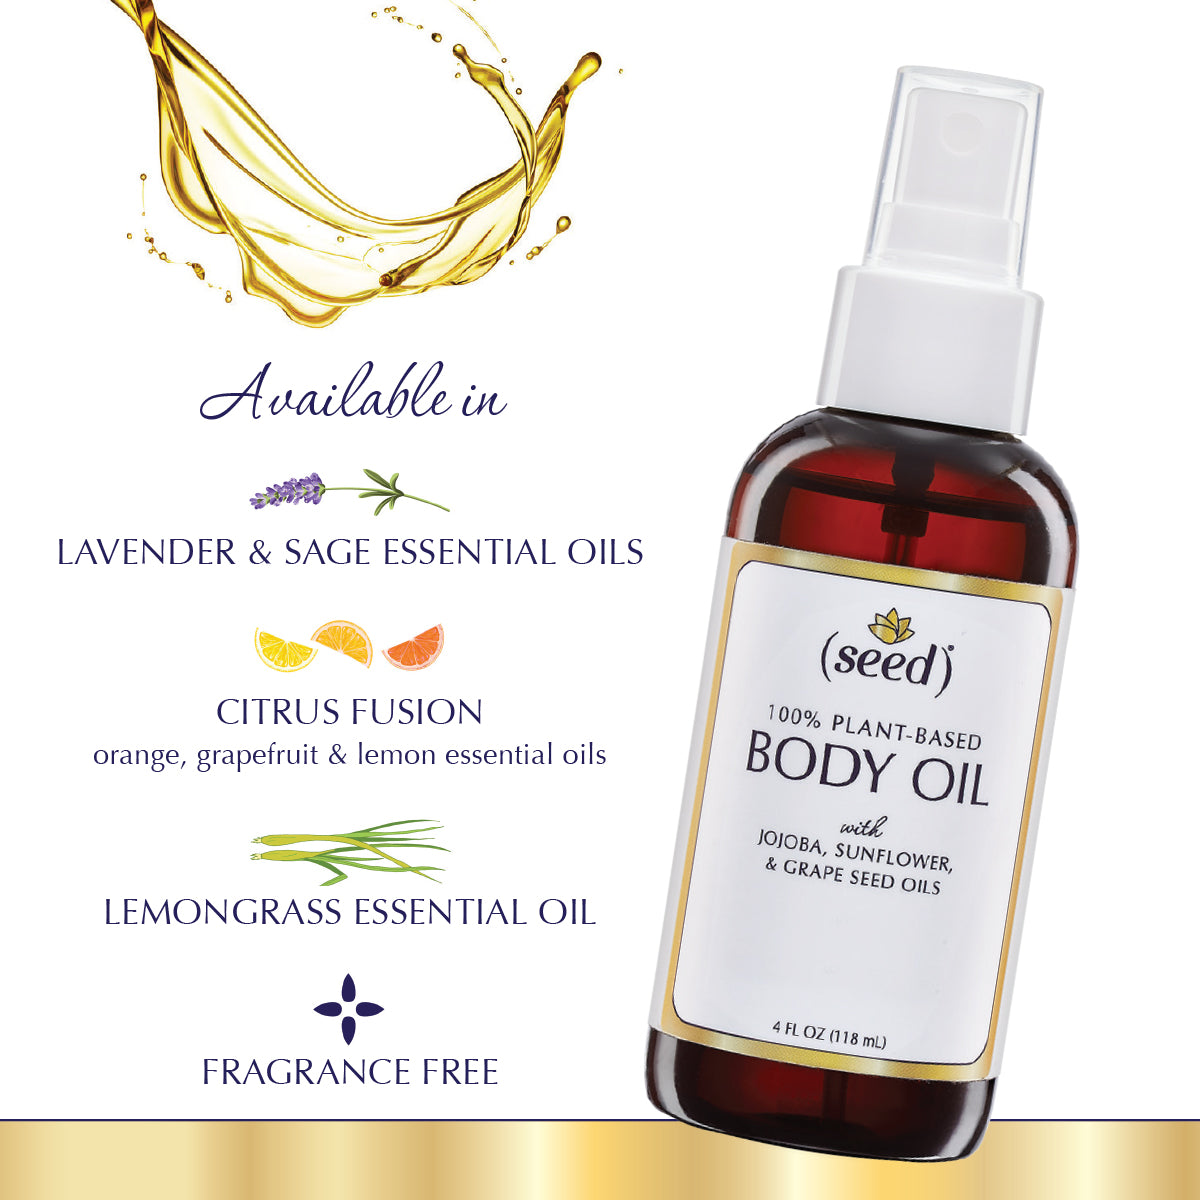 Seed Body Oil in Fragrance Free, Lavender Sage, Lemongrass, and Citrus Fusion Essential Oils